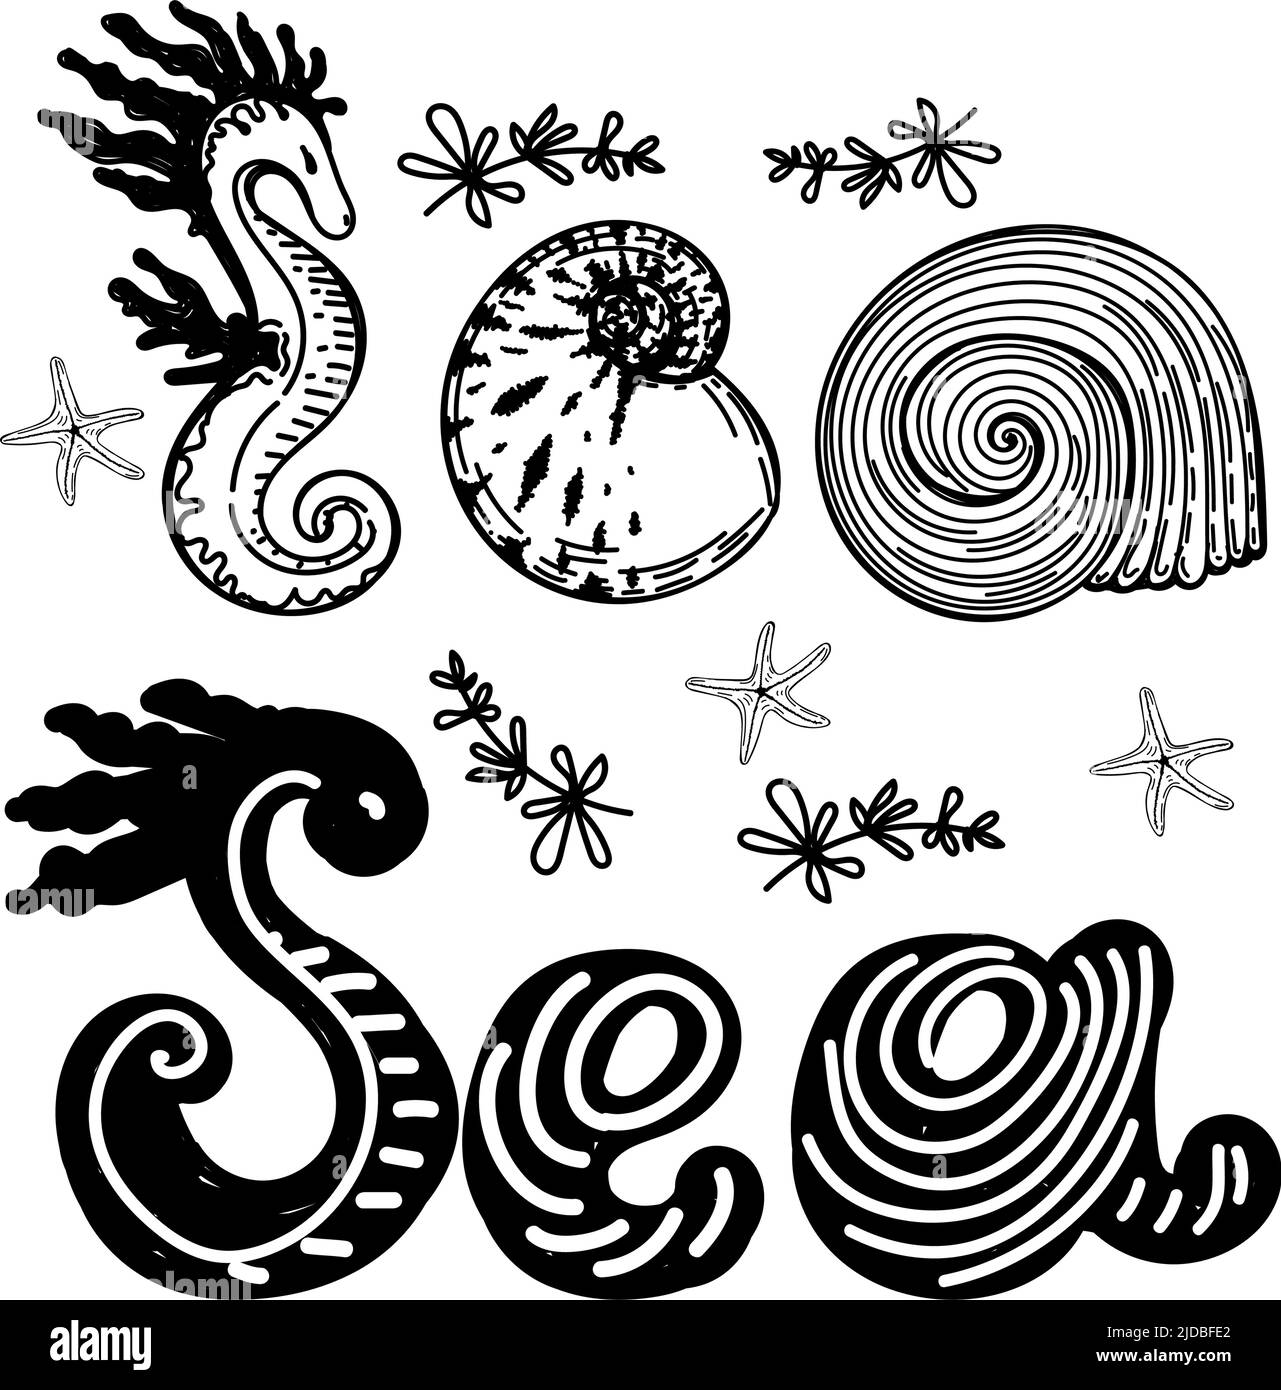 https://c8.alamy.com/comp/2JDBFE2/stylized-hand-drawn-inscription-of-the-sea-a-pictograph-of-sea-creatures-hand-drawn-in-sketch-style-a-rebus-a-riddle-seahorse-seashells-seaweed-2JDBFE2.jpg